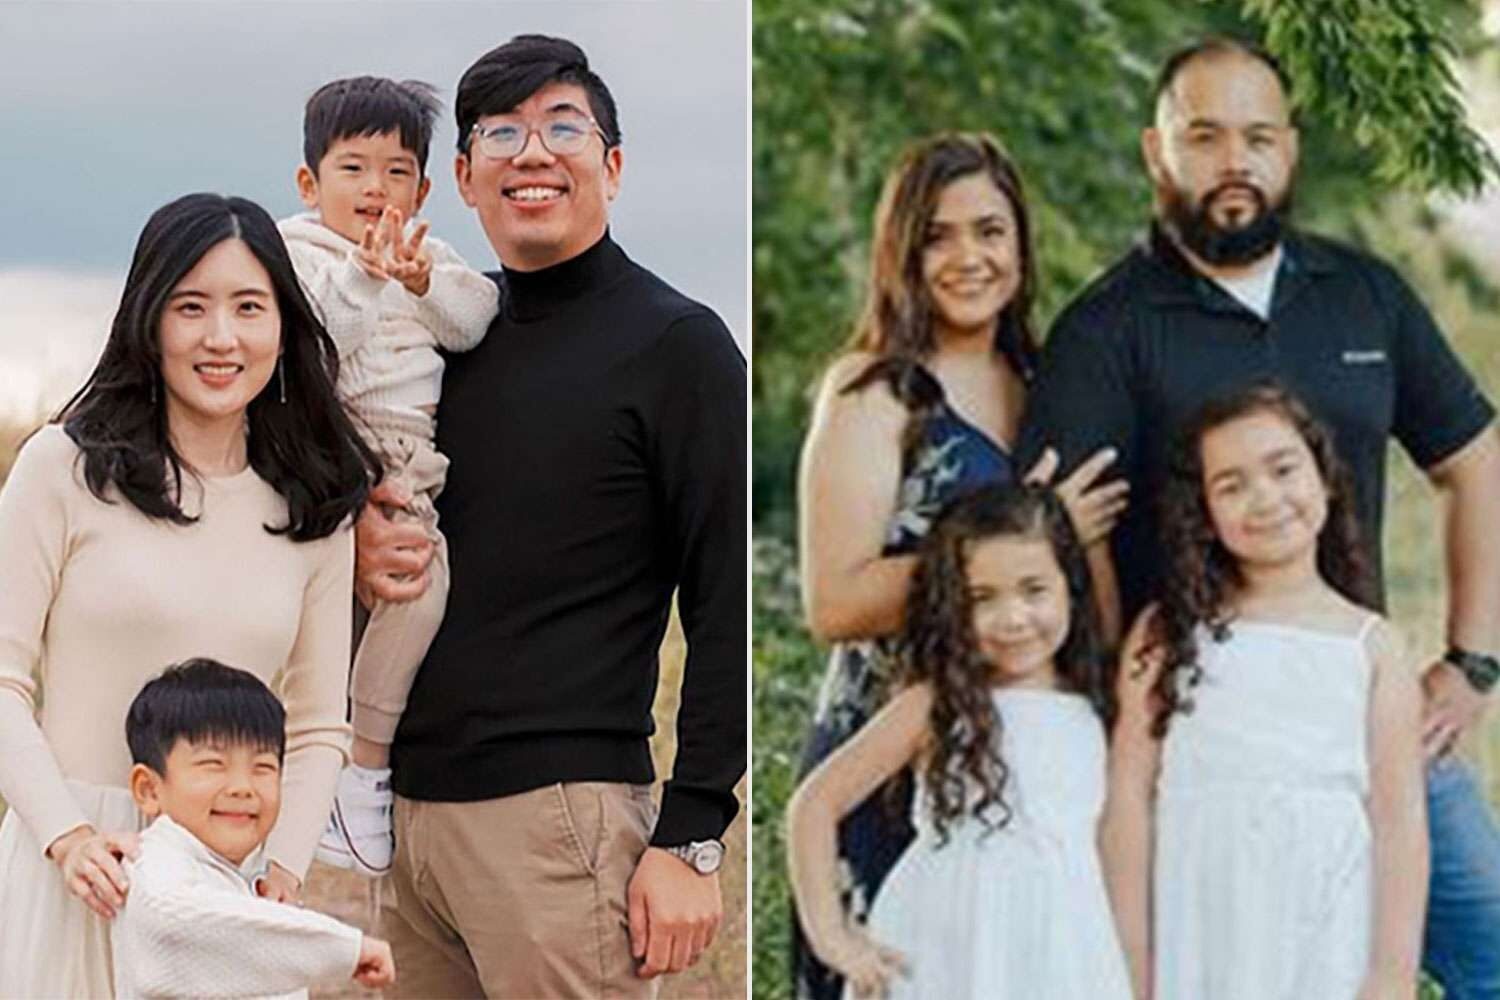 These are the victims of the Texas Mall Shooting